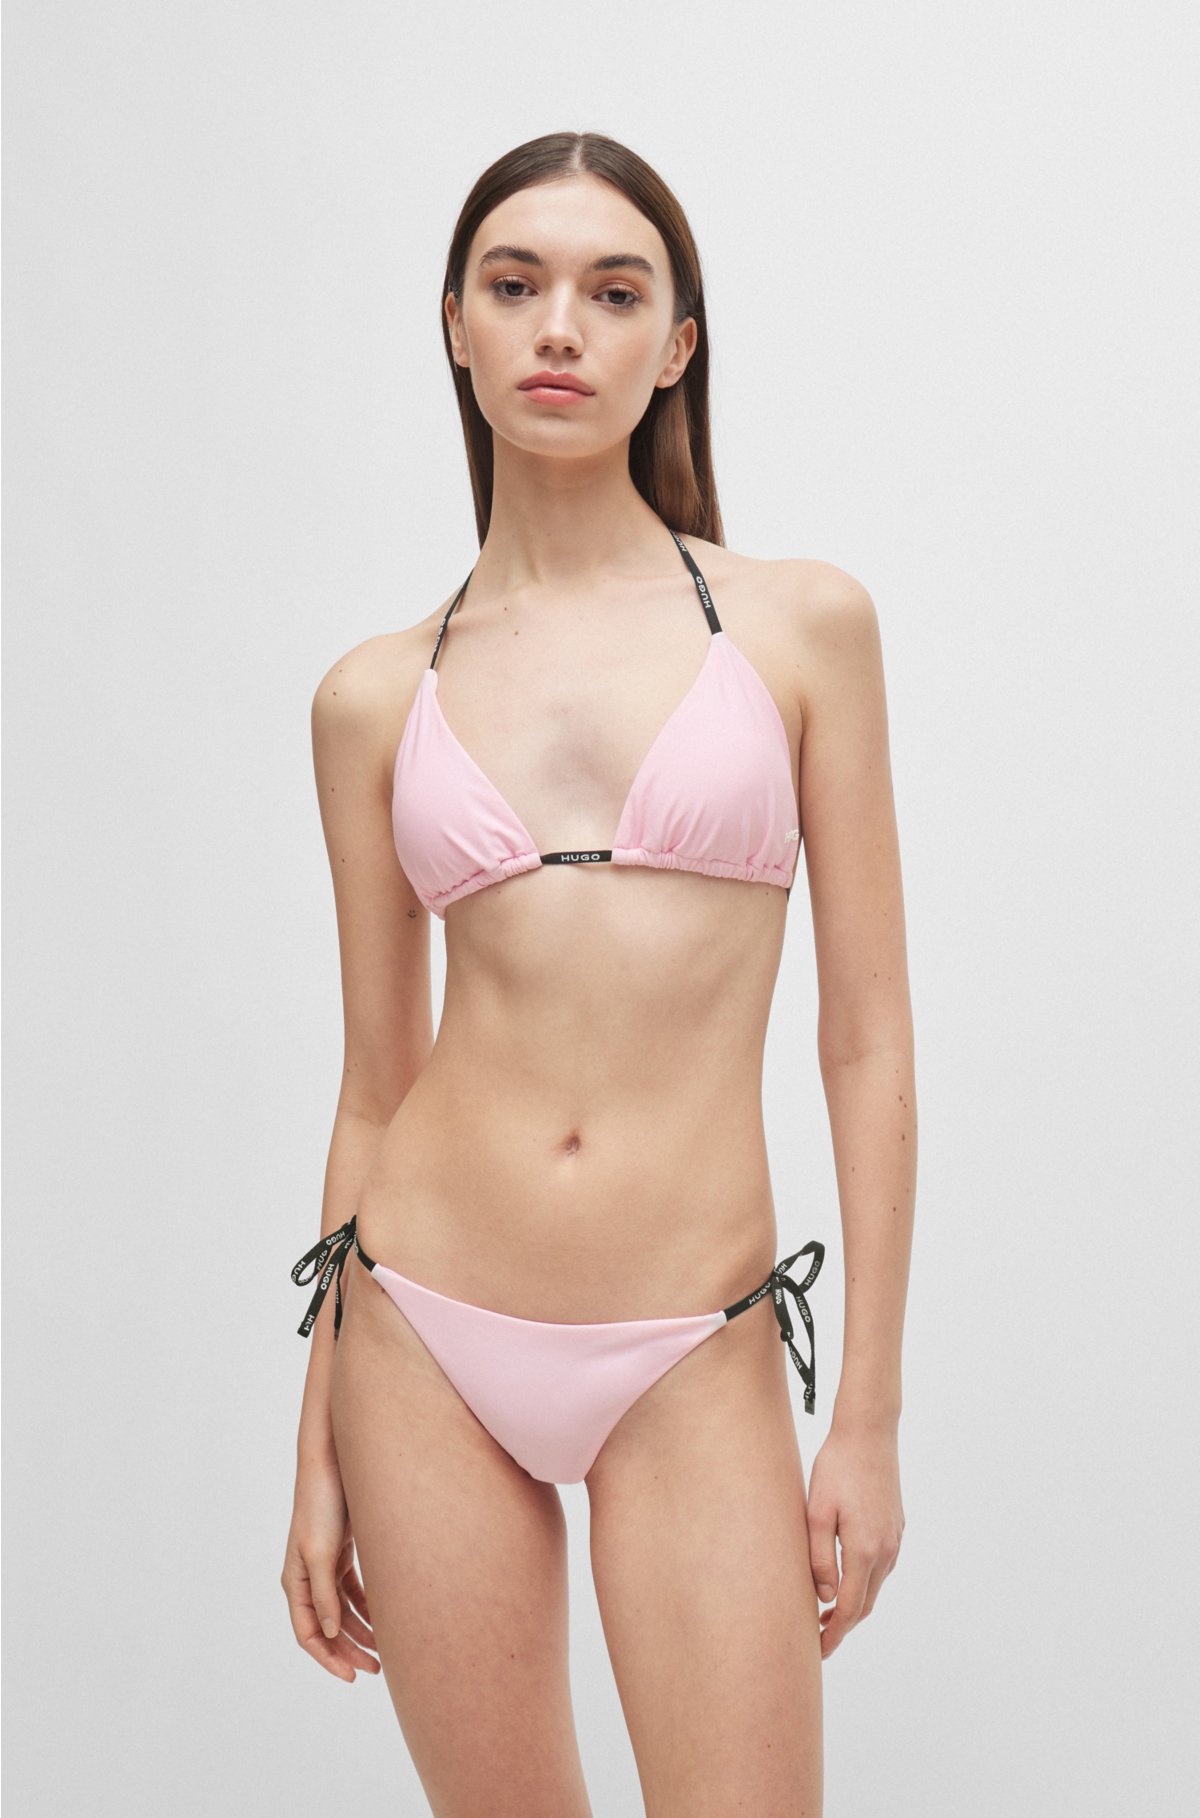 Branded-strap triangle bikini top with logo detail, light pink